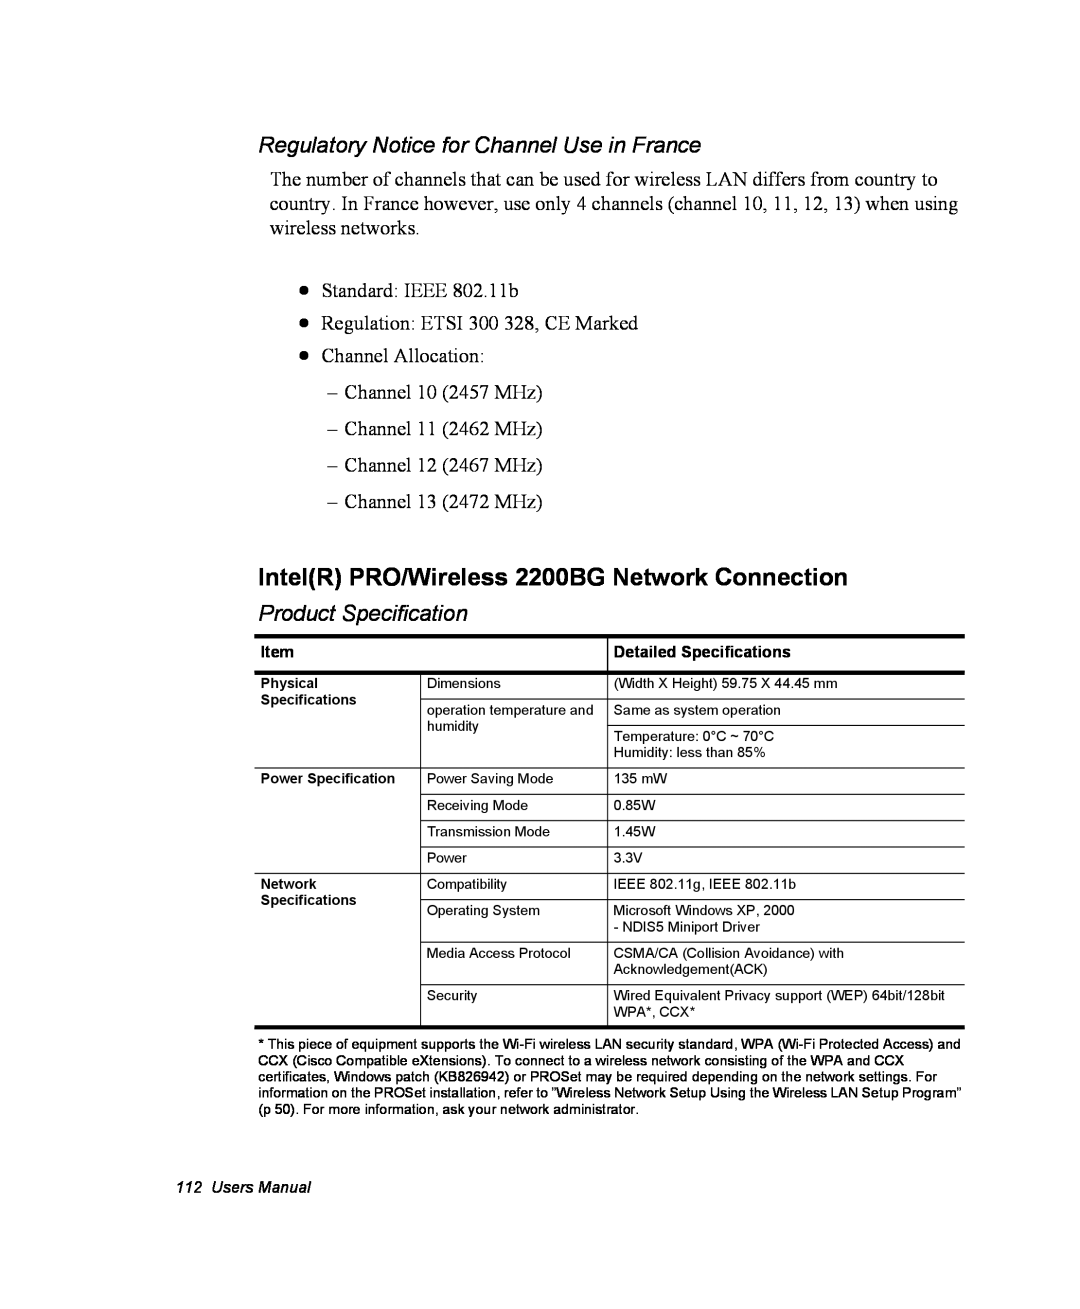 Samsung NM40PRTV01/SEF manual IntelR PRO/Wireless 2200BG Network Connection, Regulatory Notice for Channel Use in France 